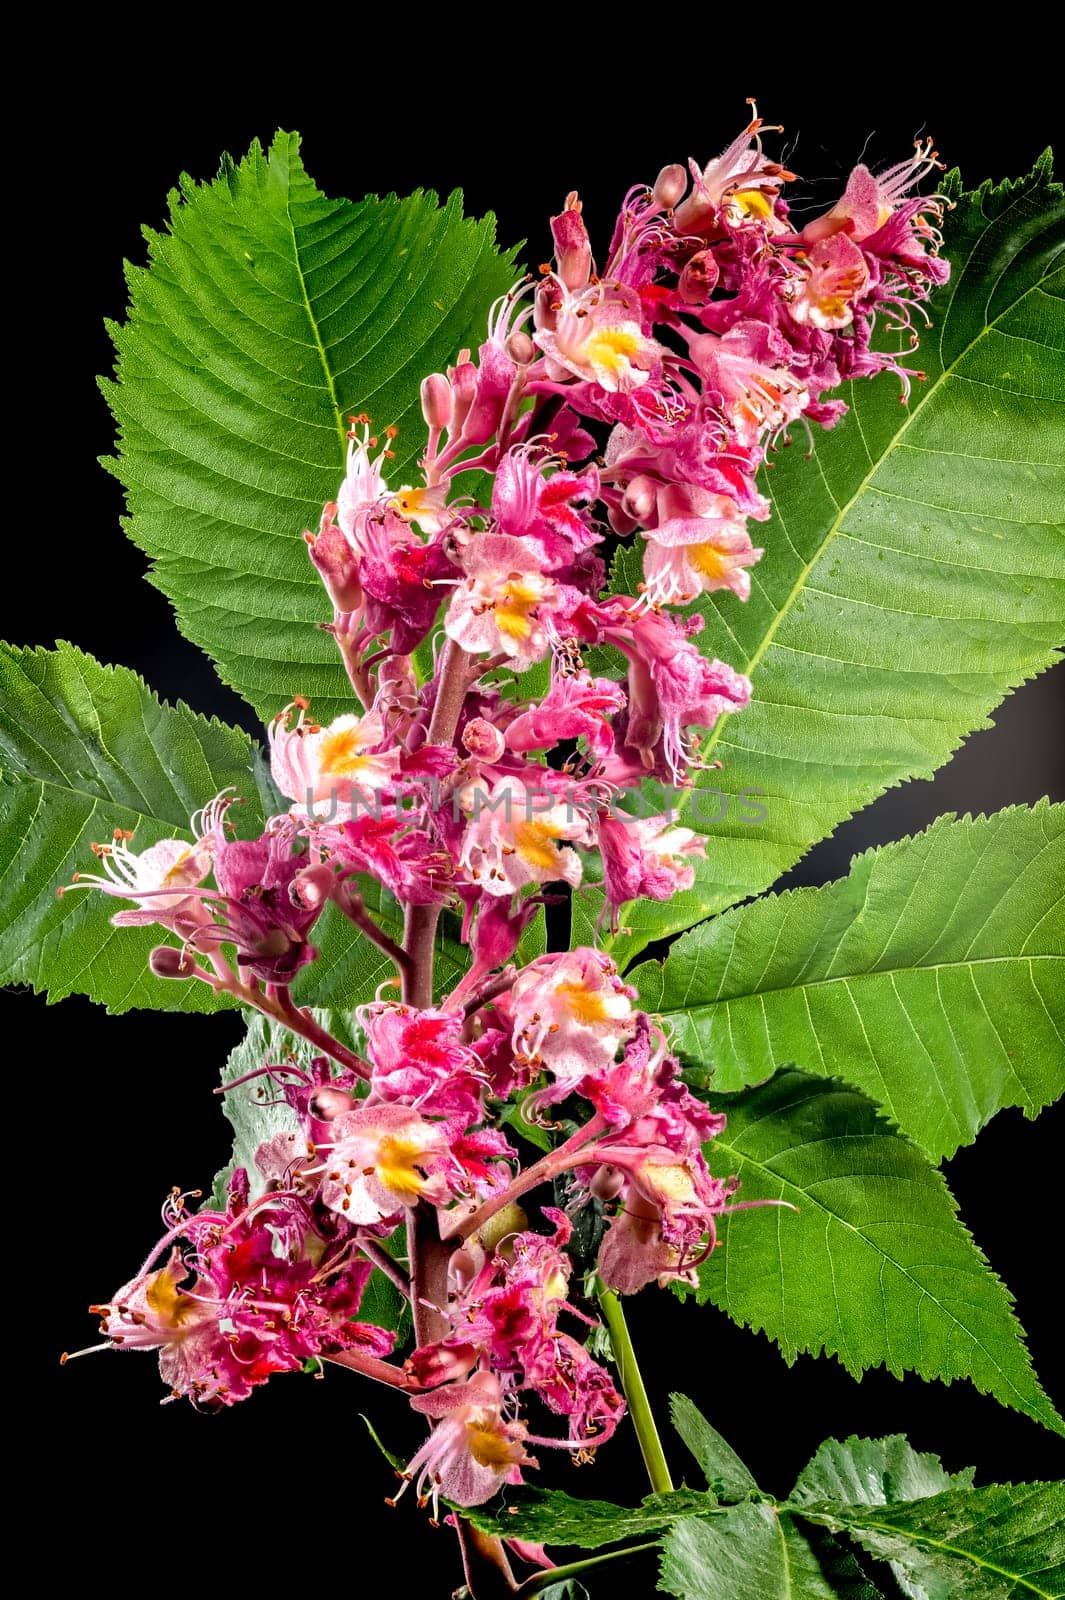 Blooming red horse-chestnut flowers on a black background by Multipedia